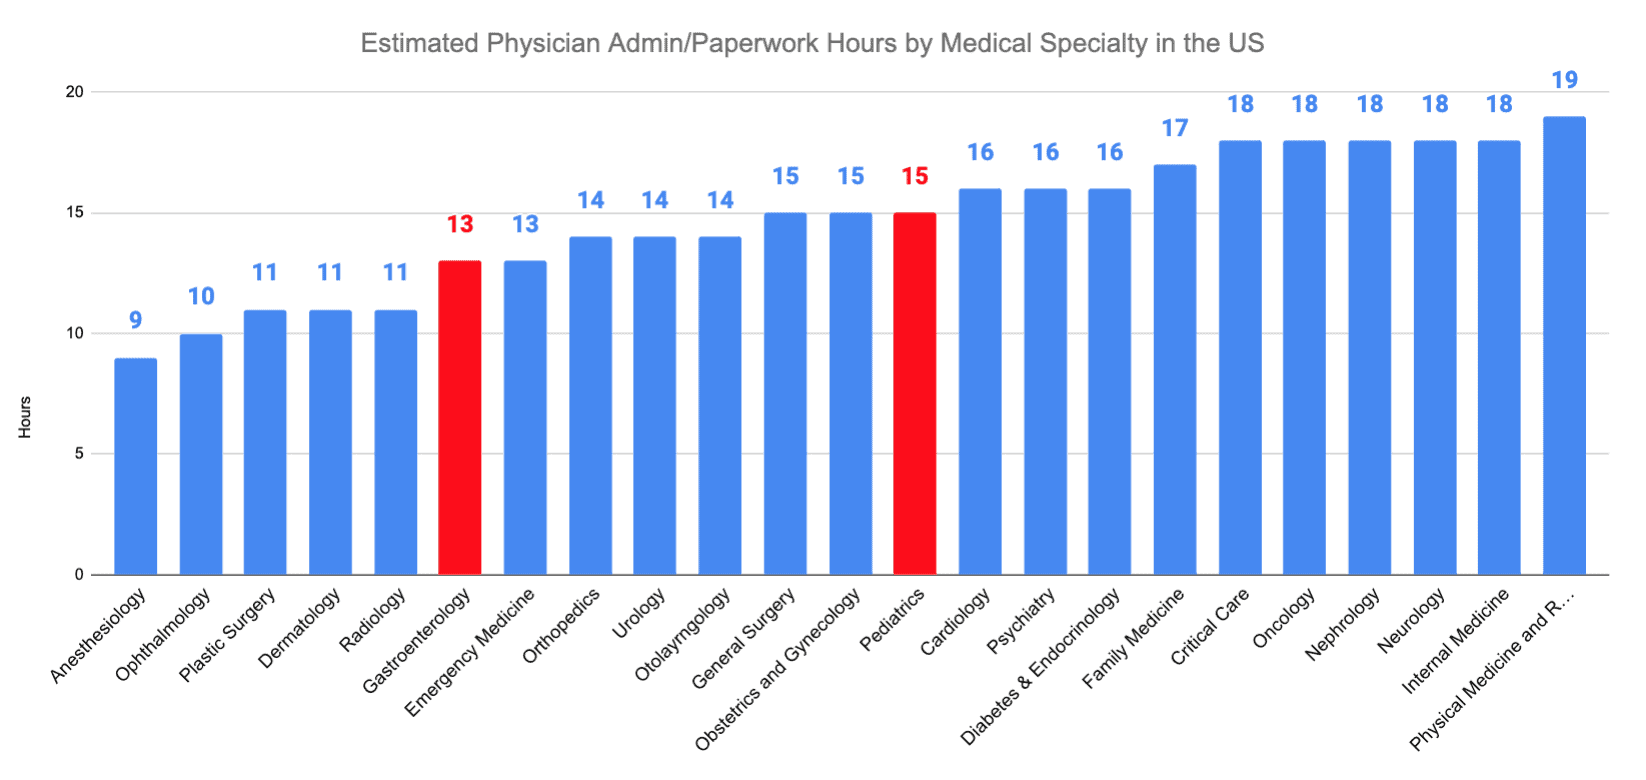 Gastroenterology vs. Pediatrics Estimated Physician Admin/Paperwork Hours by Medical Specialty in the US